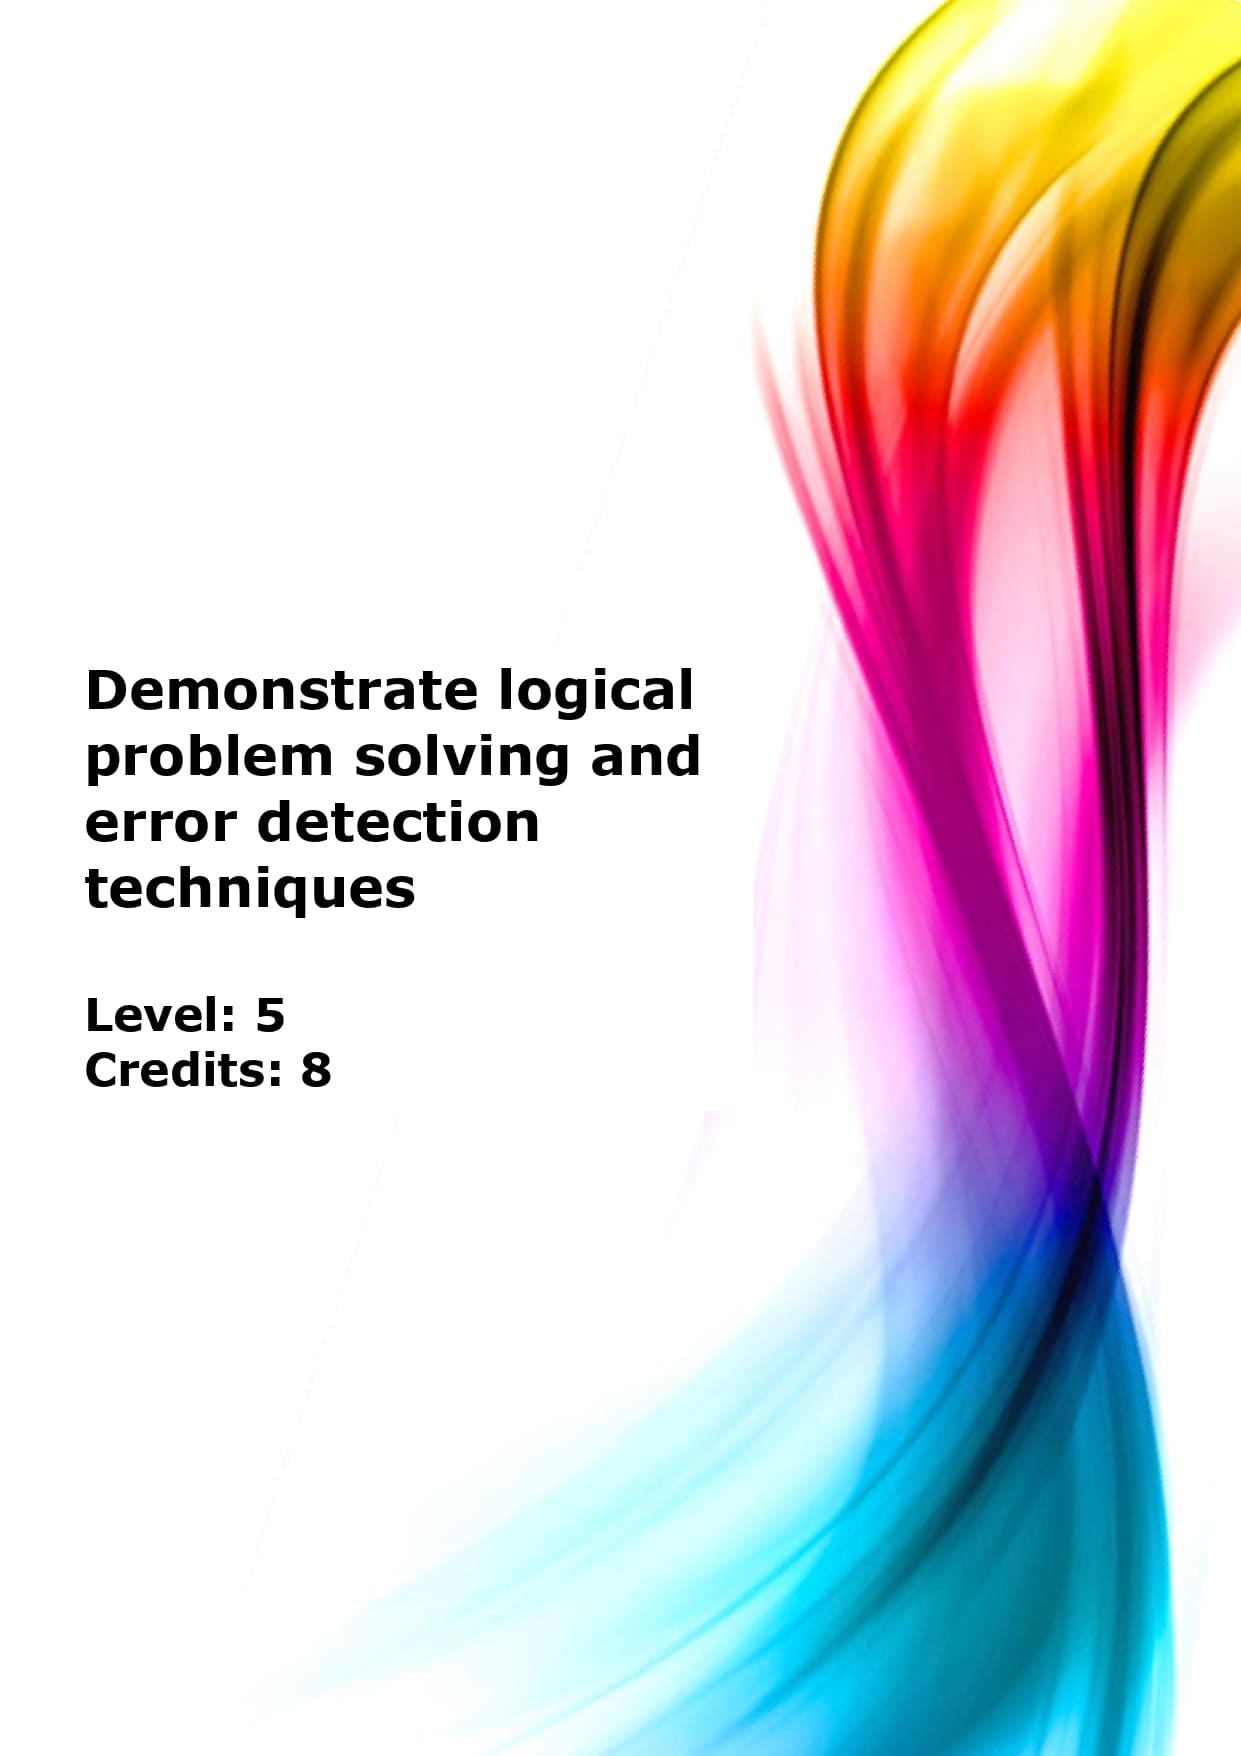 demonstrate logical problem solving and error detection techniques